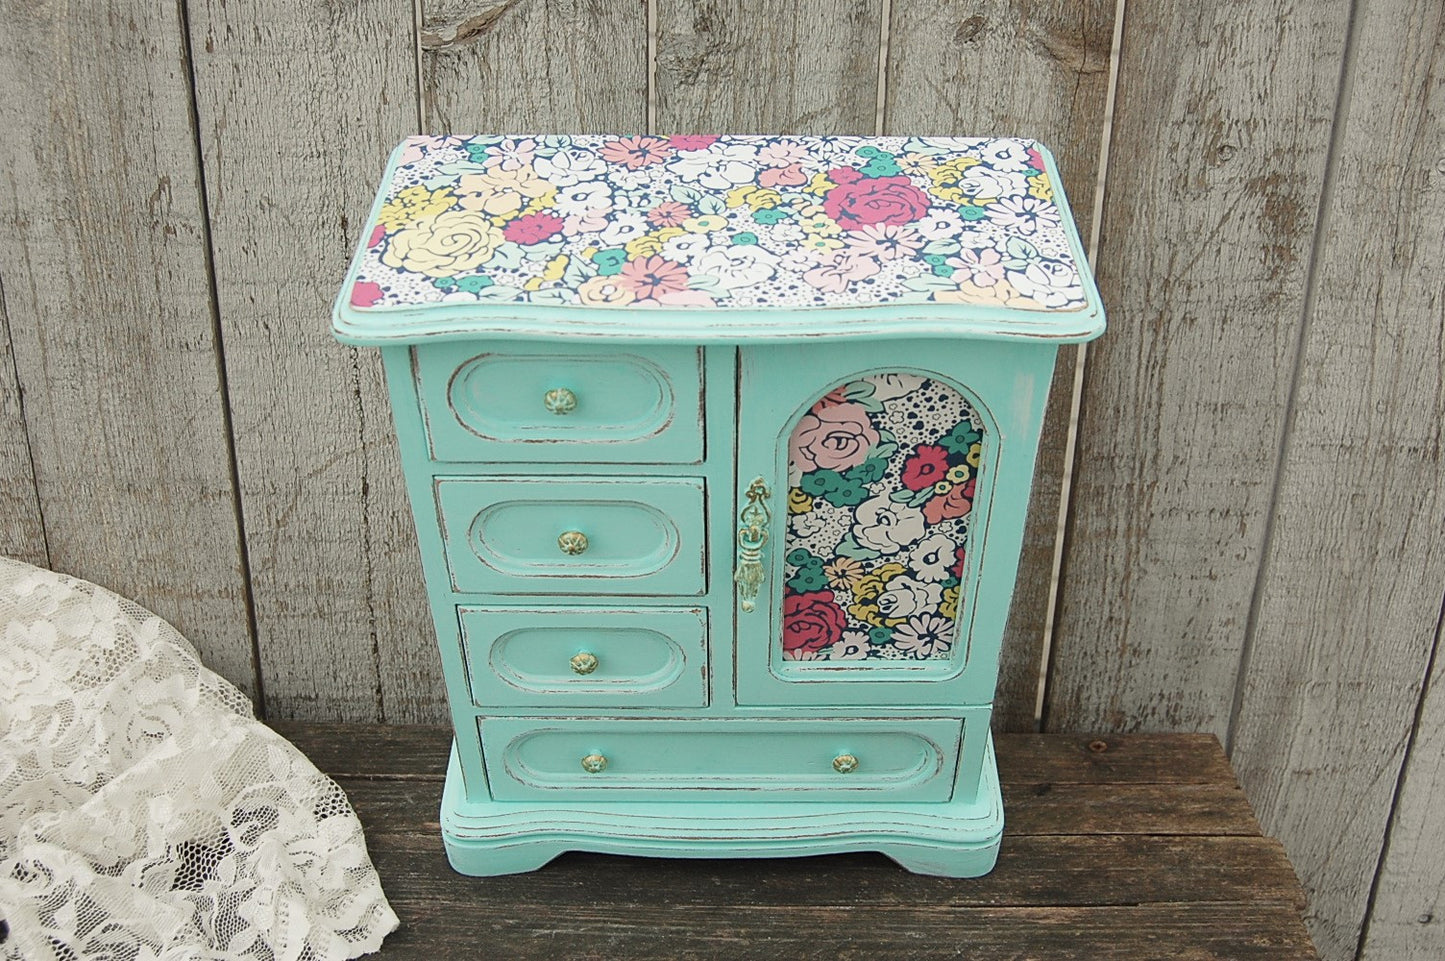 Mint flowered music box - The Vintage Artistry